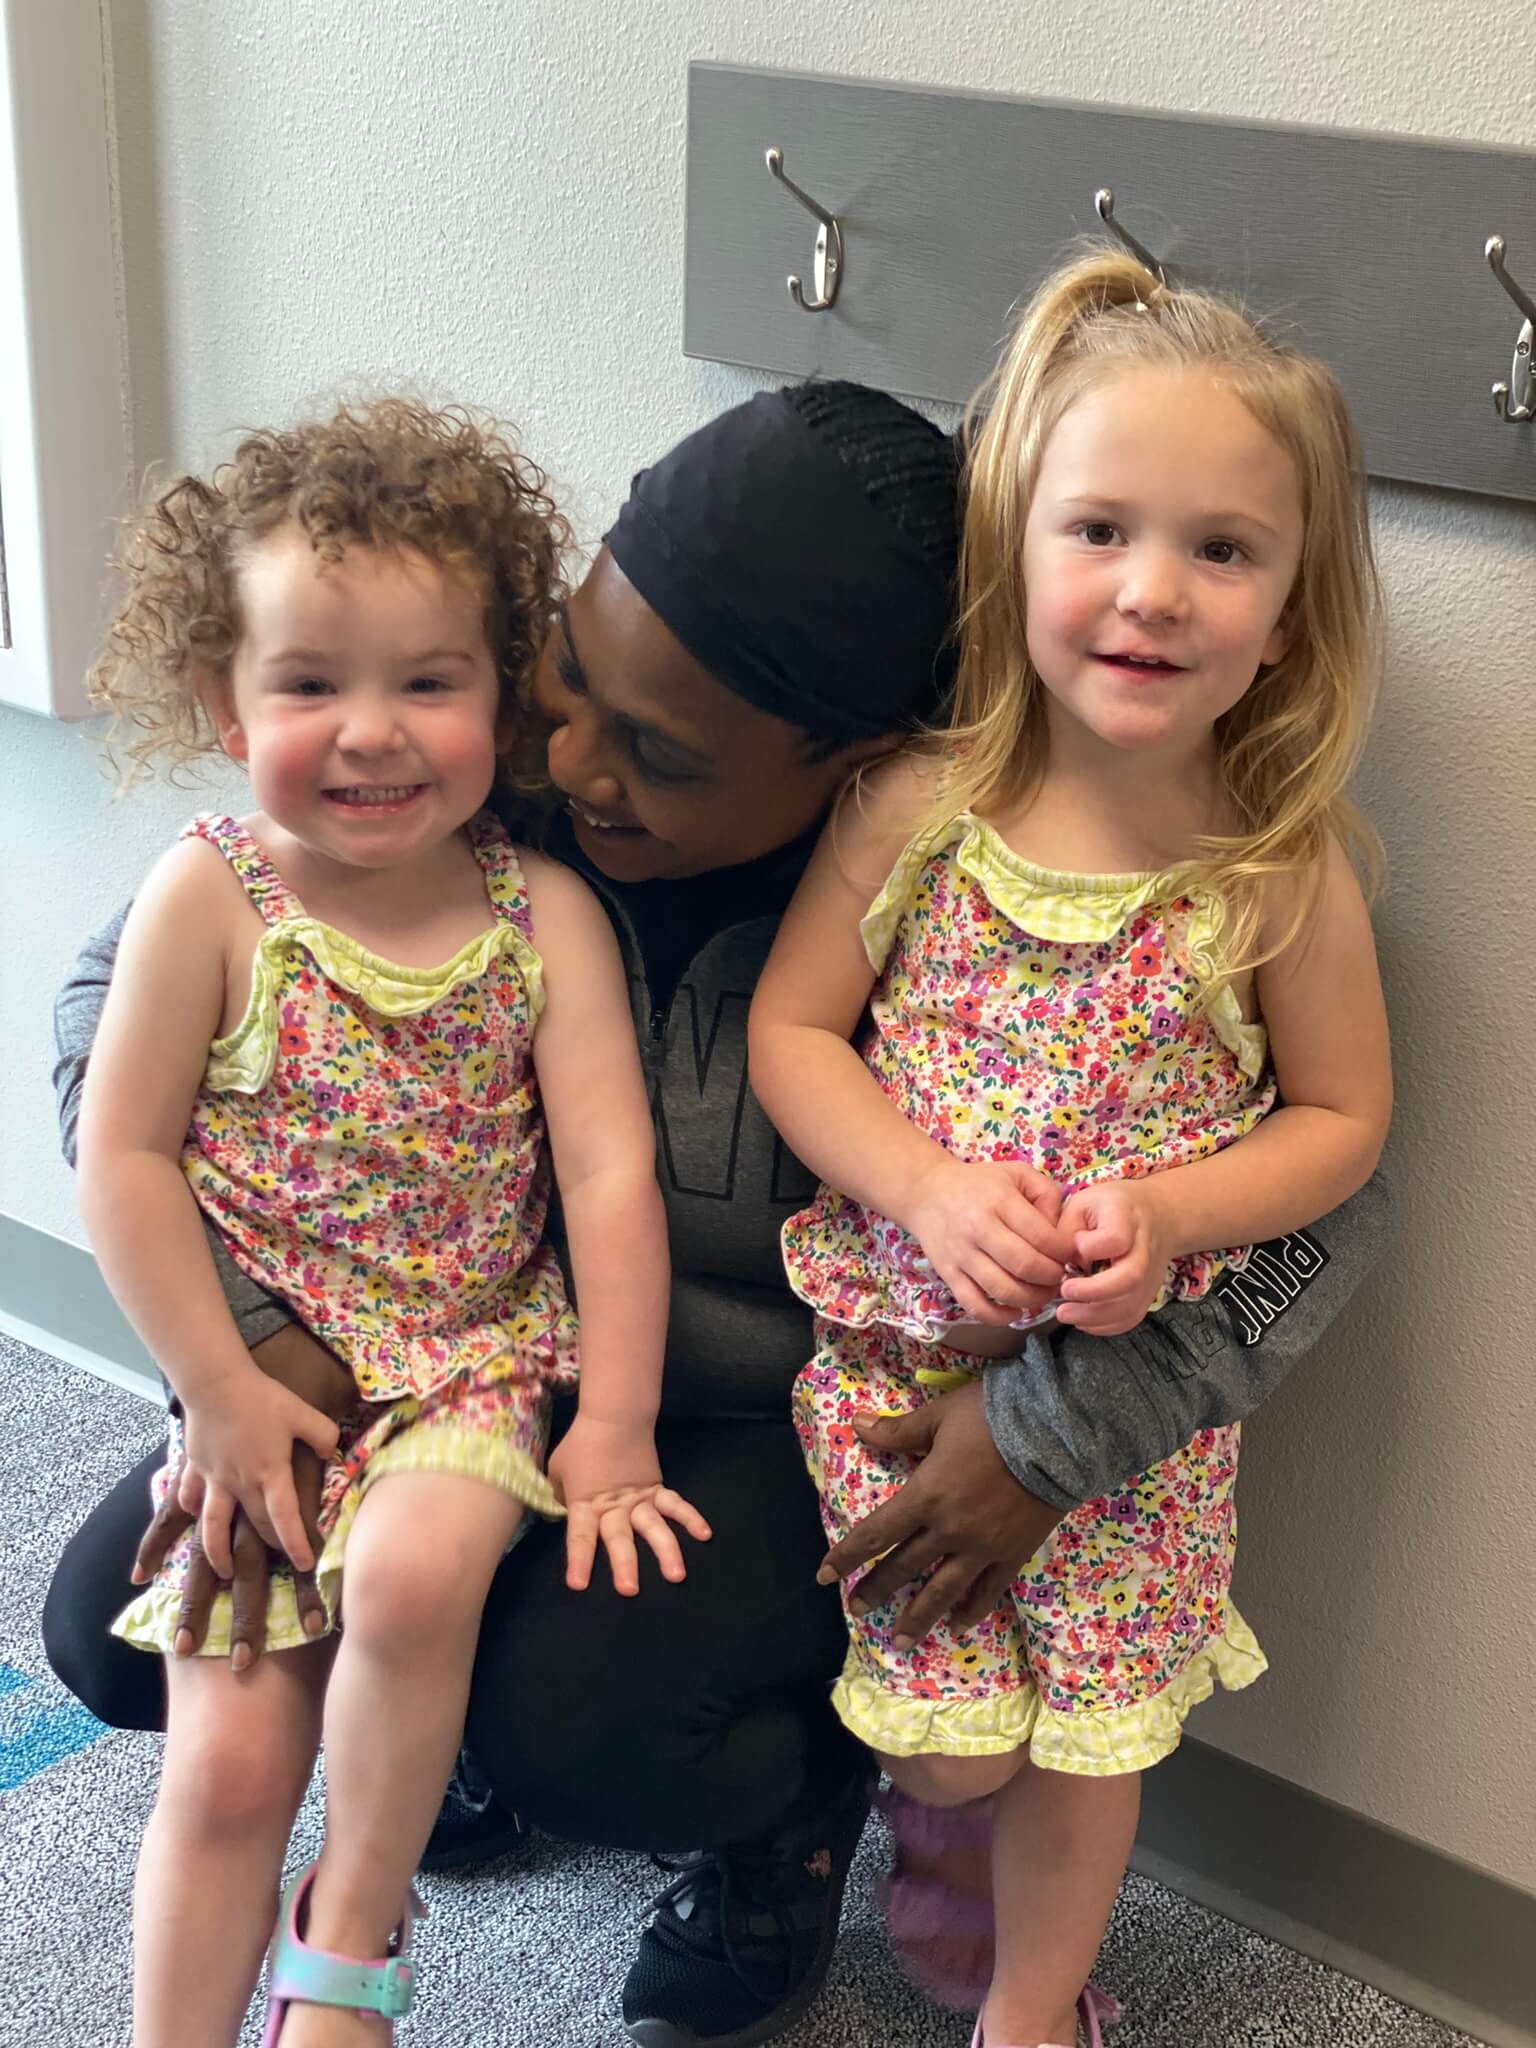 It Takes a Village Childcare employee bent down hugging twin girls